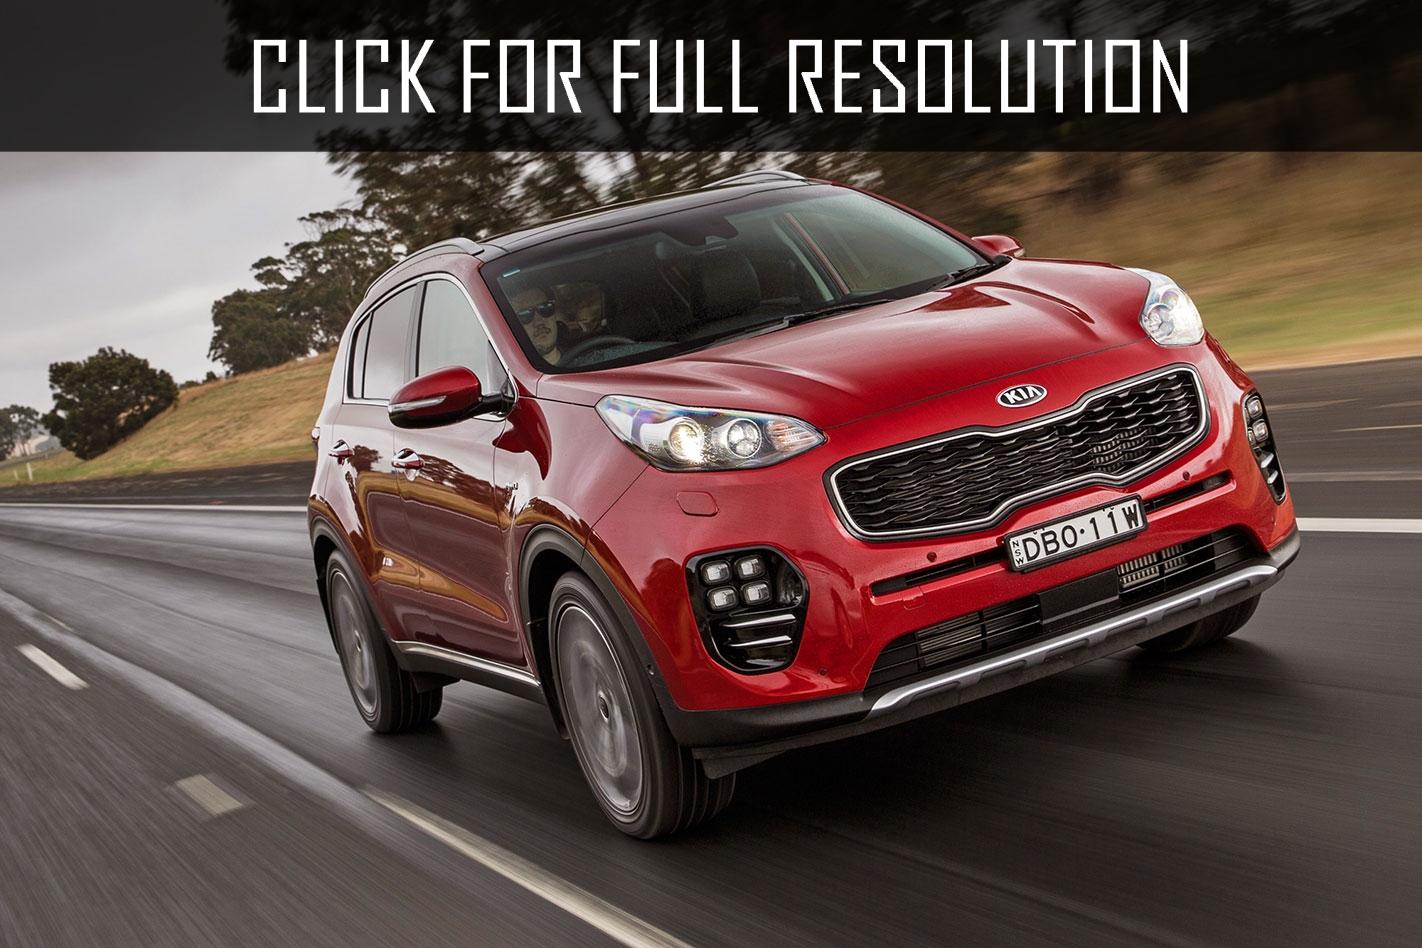 2016 Kia Sportage news, reviews, msrp, ratings with amazing images